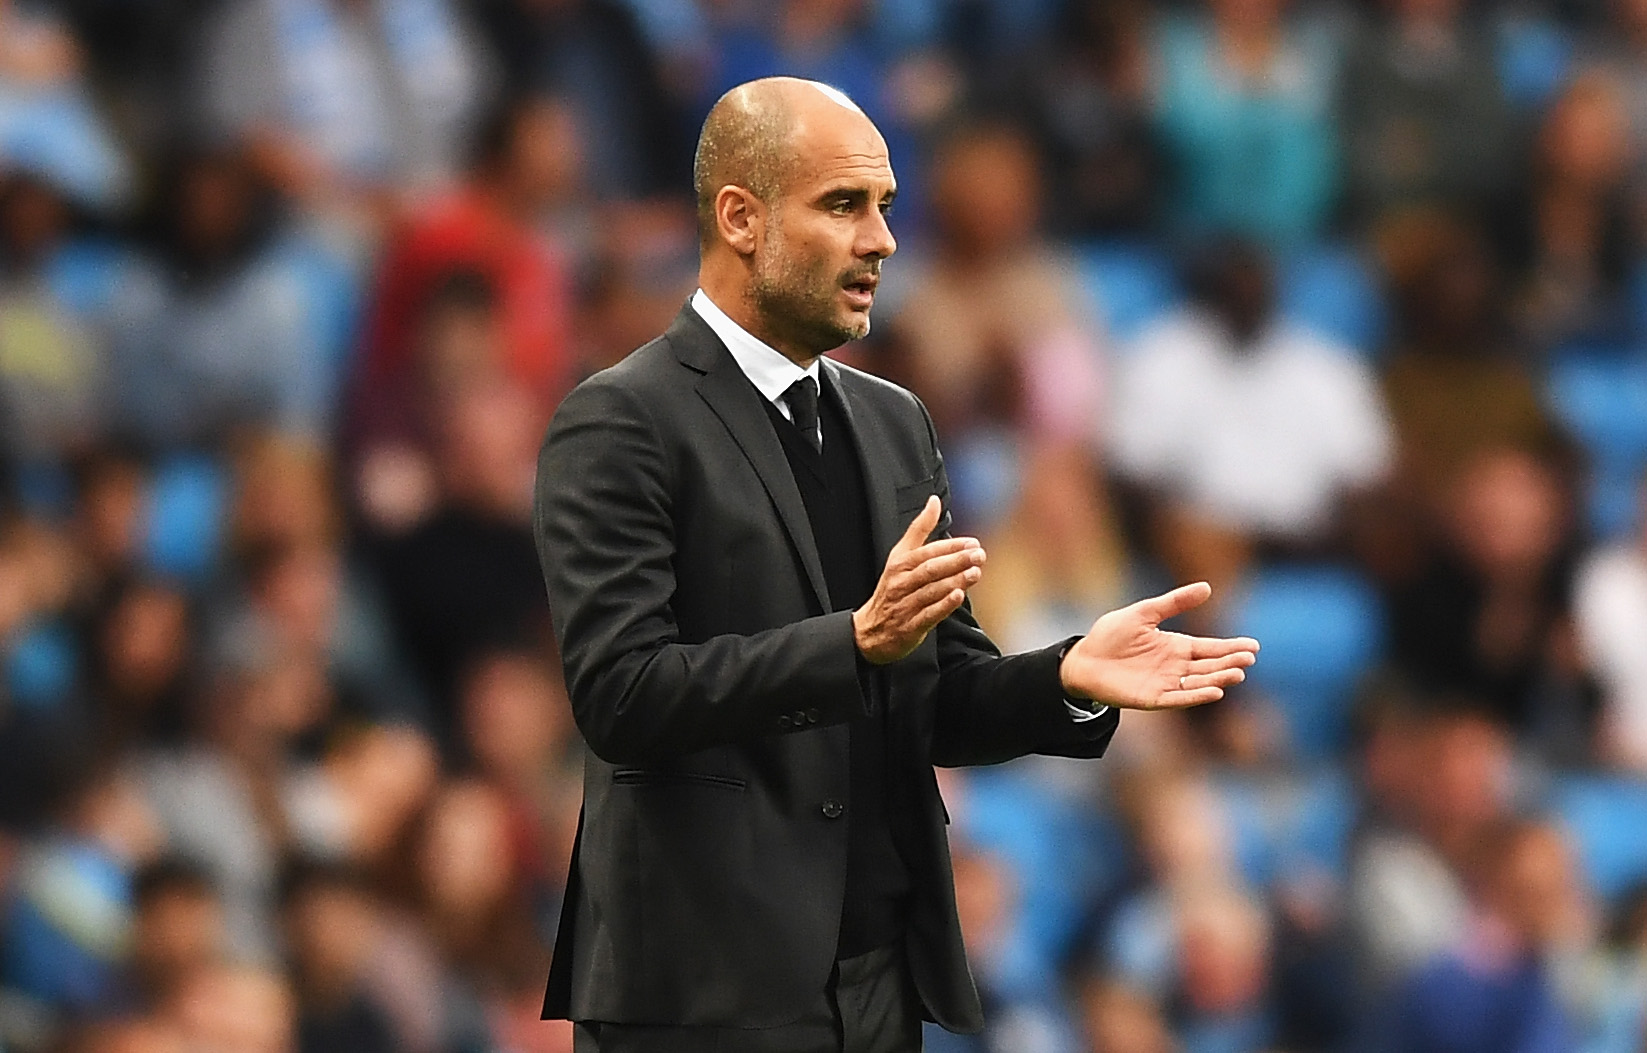 Guardiola demands apology from Yaya Toure's agent